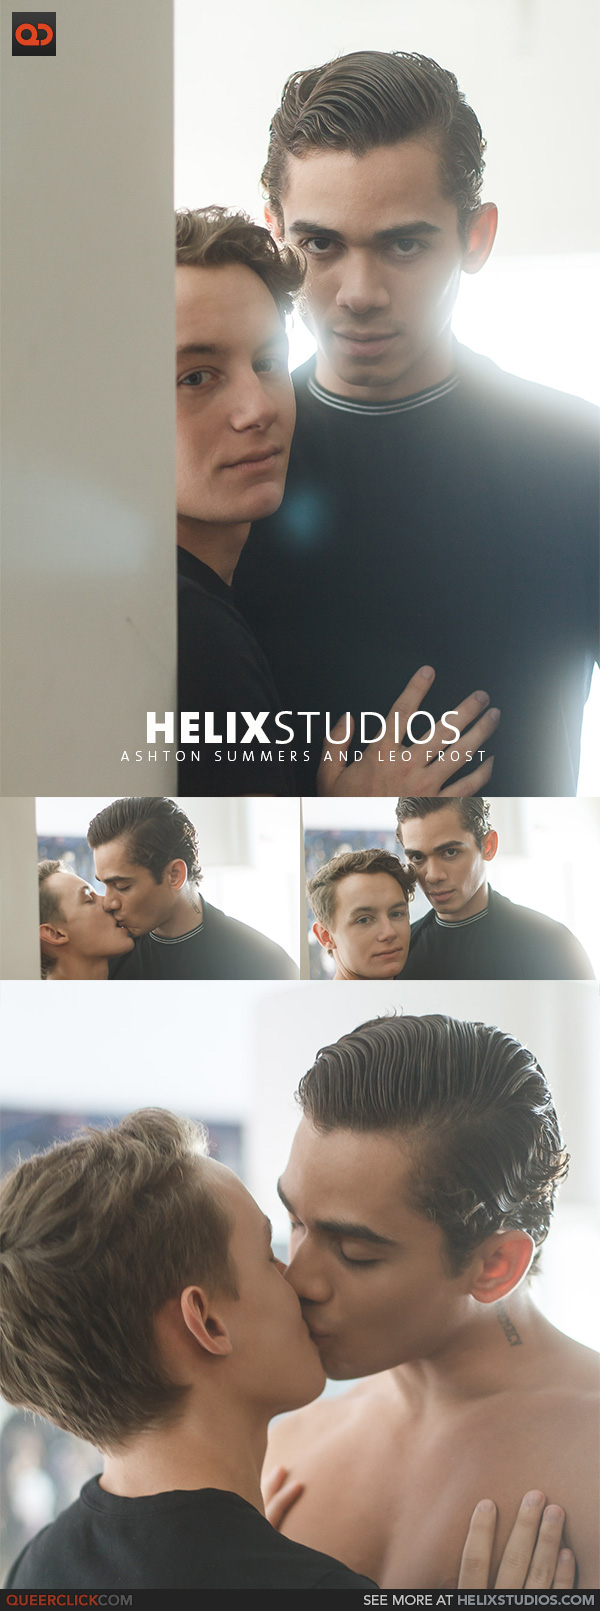 Helix Studios: Ashton Summers and Leo Frost